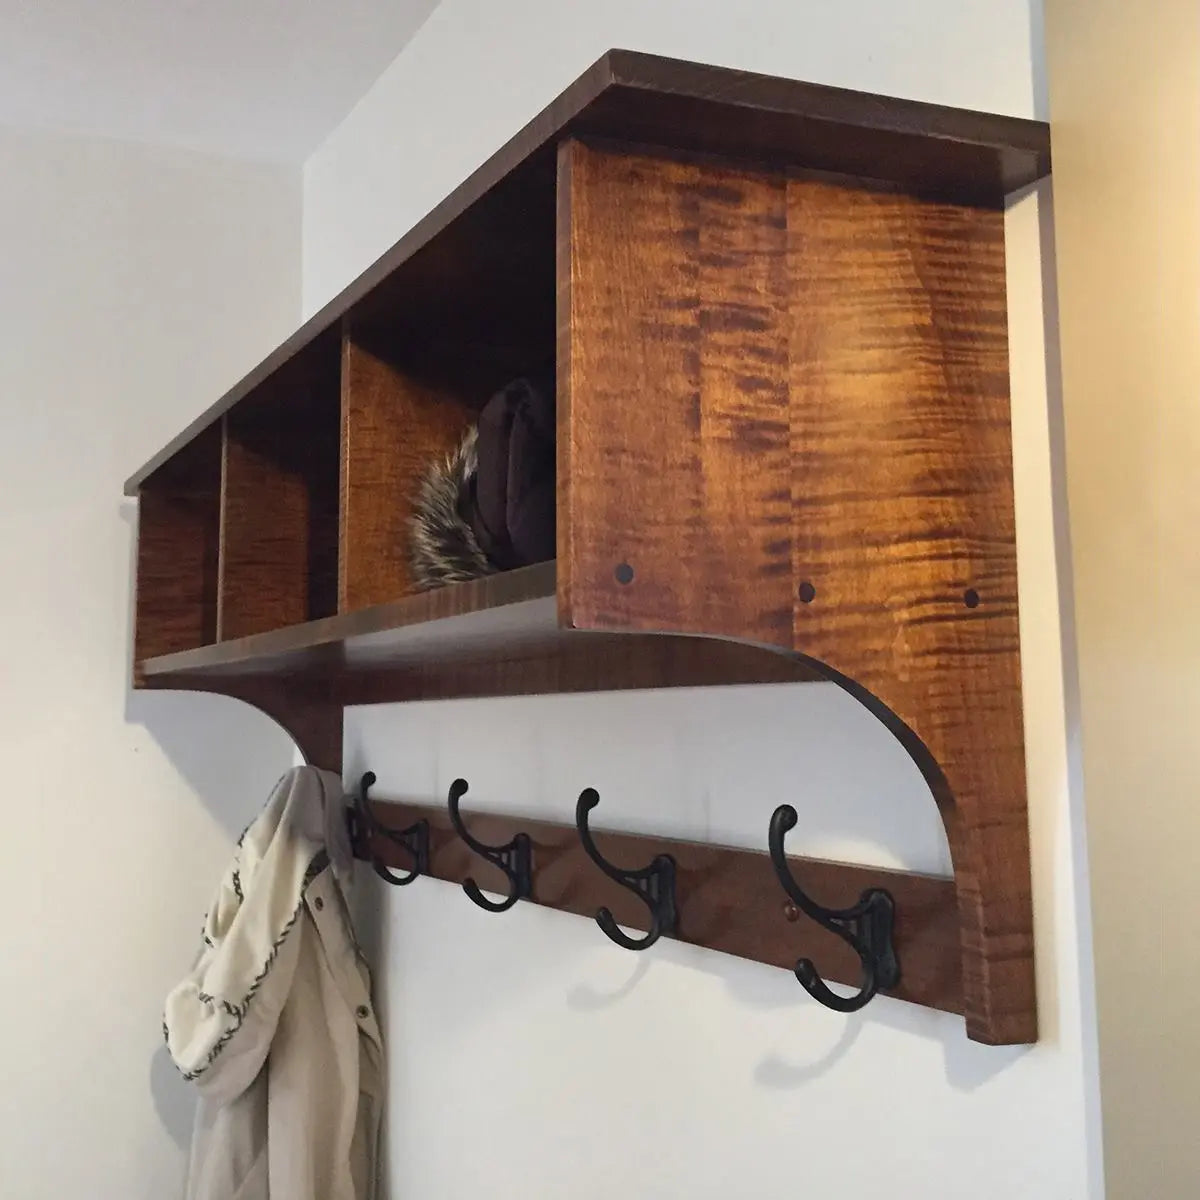 cubby shelf and coat rack, curly maple